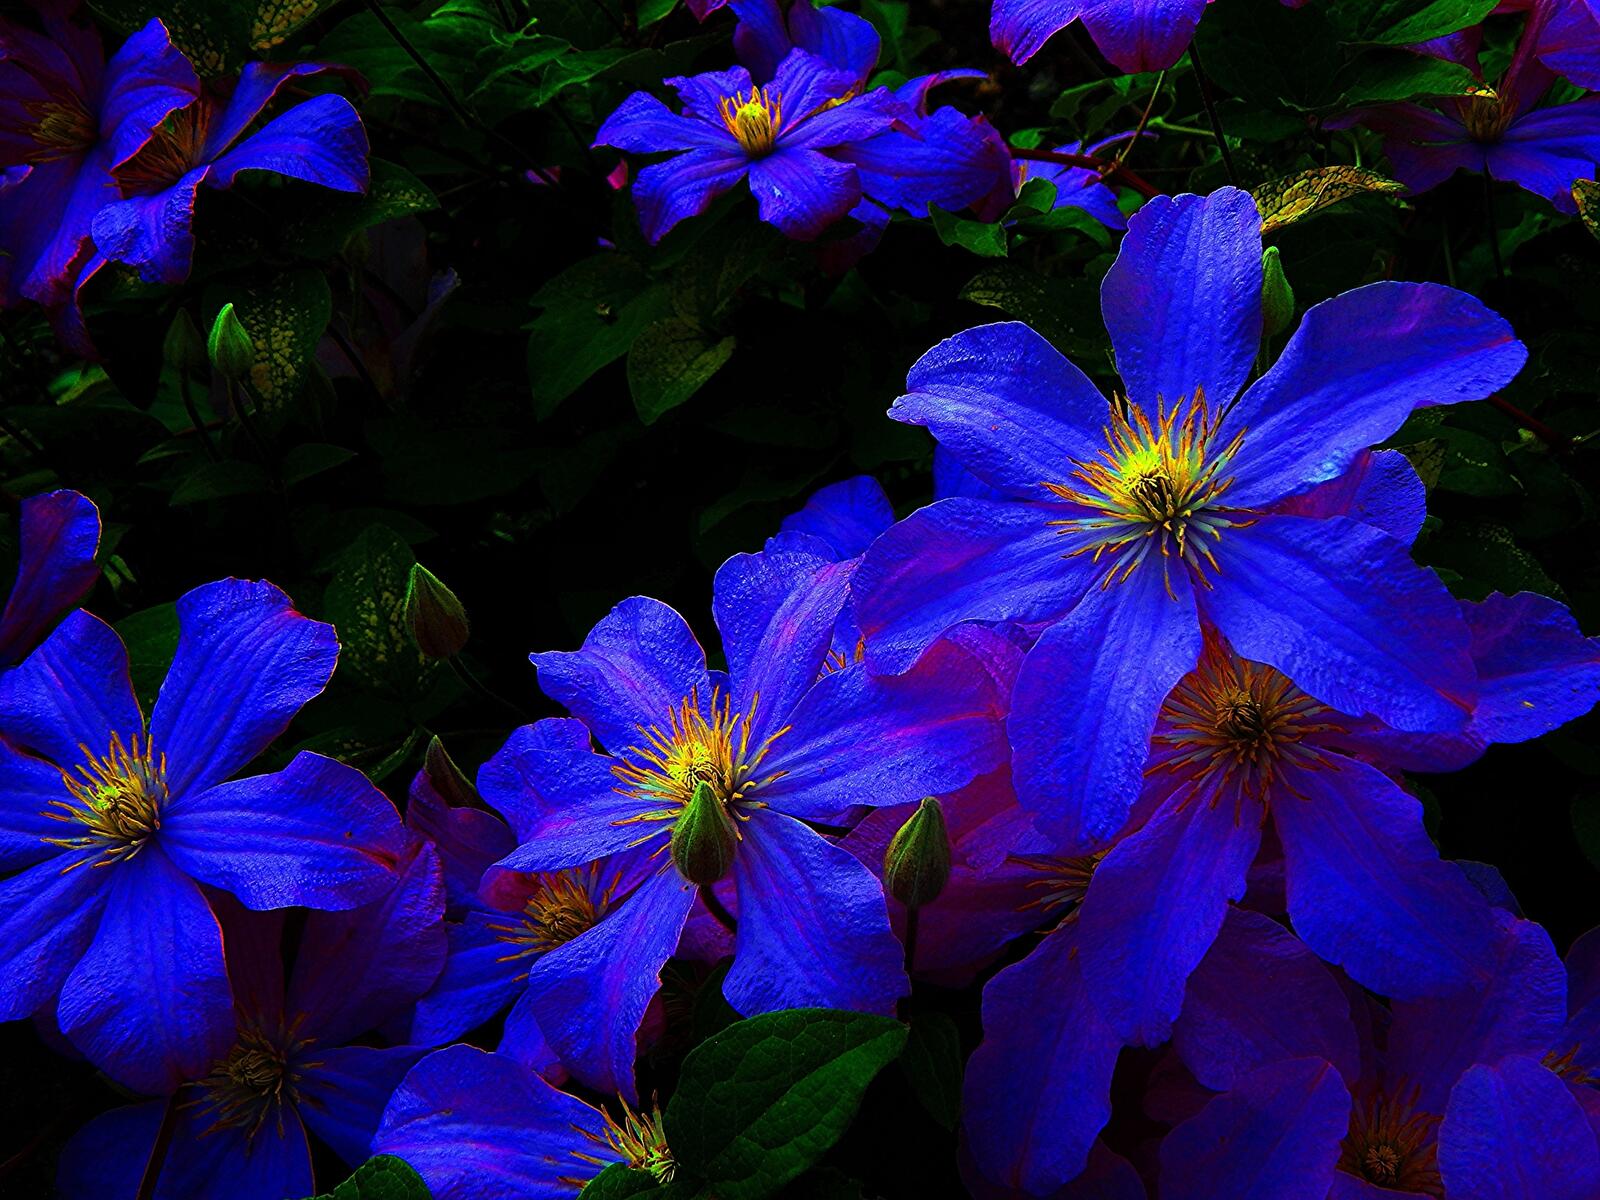 Wallpapers bright flowers blue on the desktop